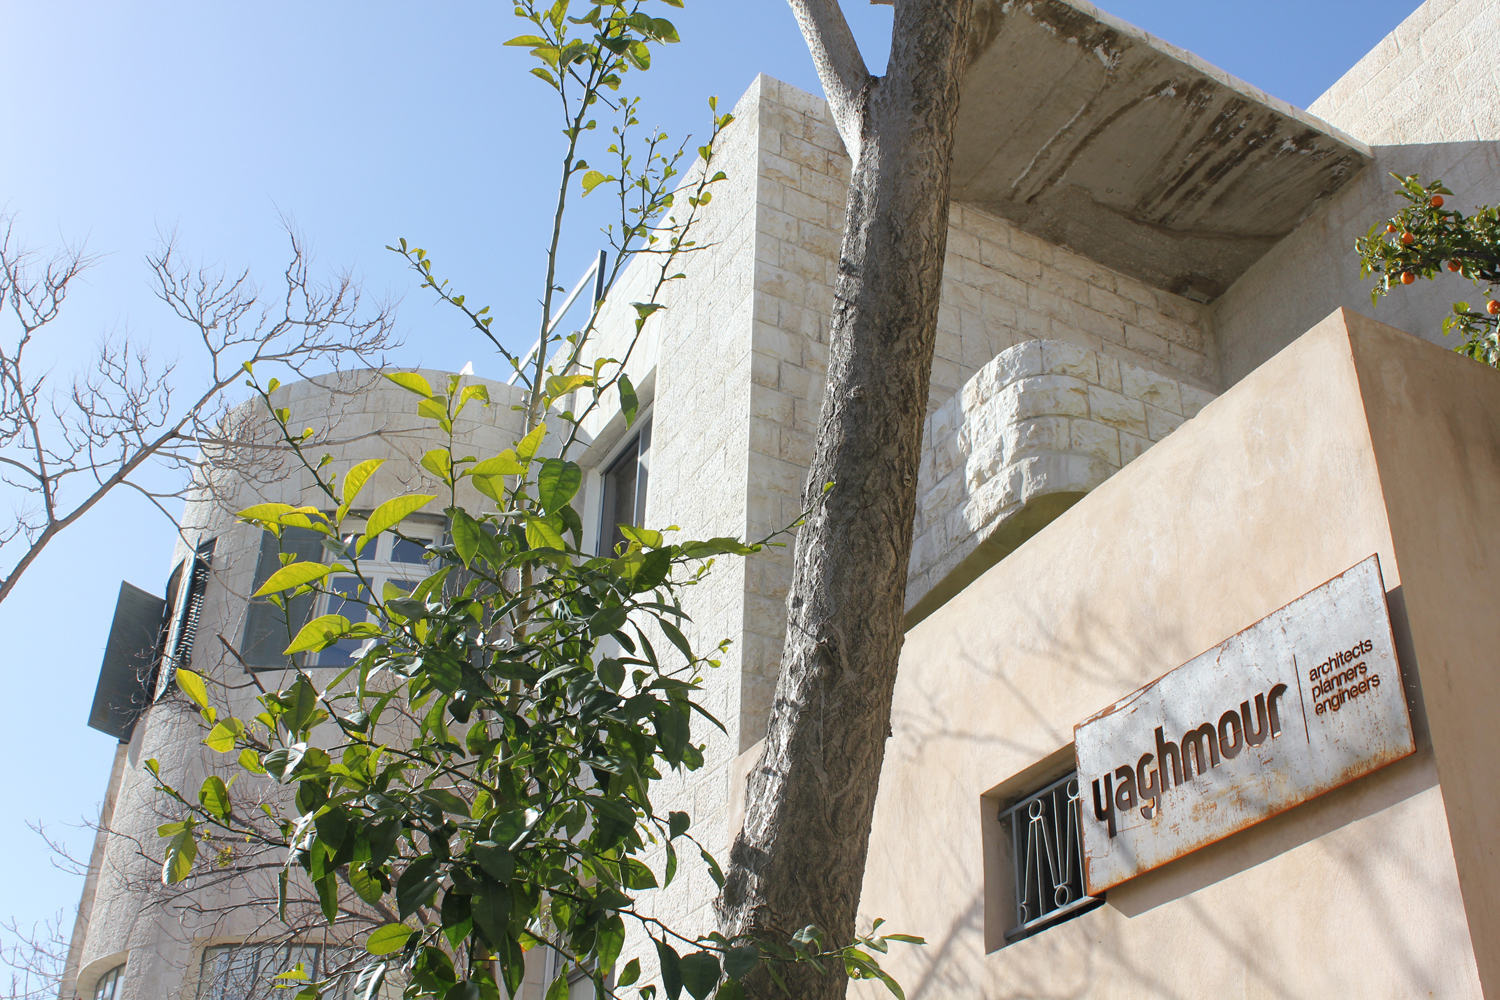 Yaghmour Office and Gallery